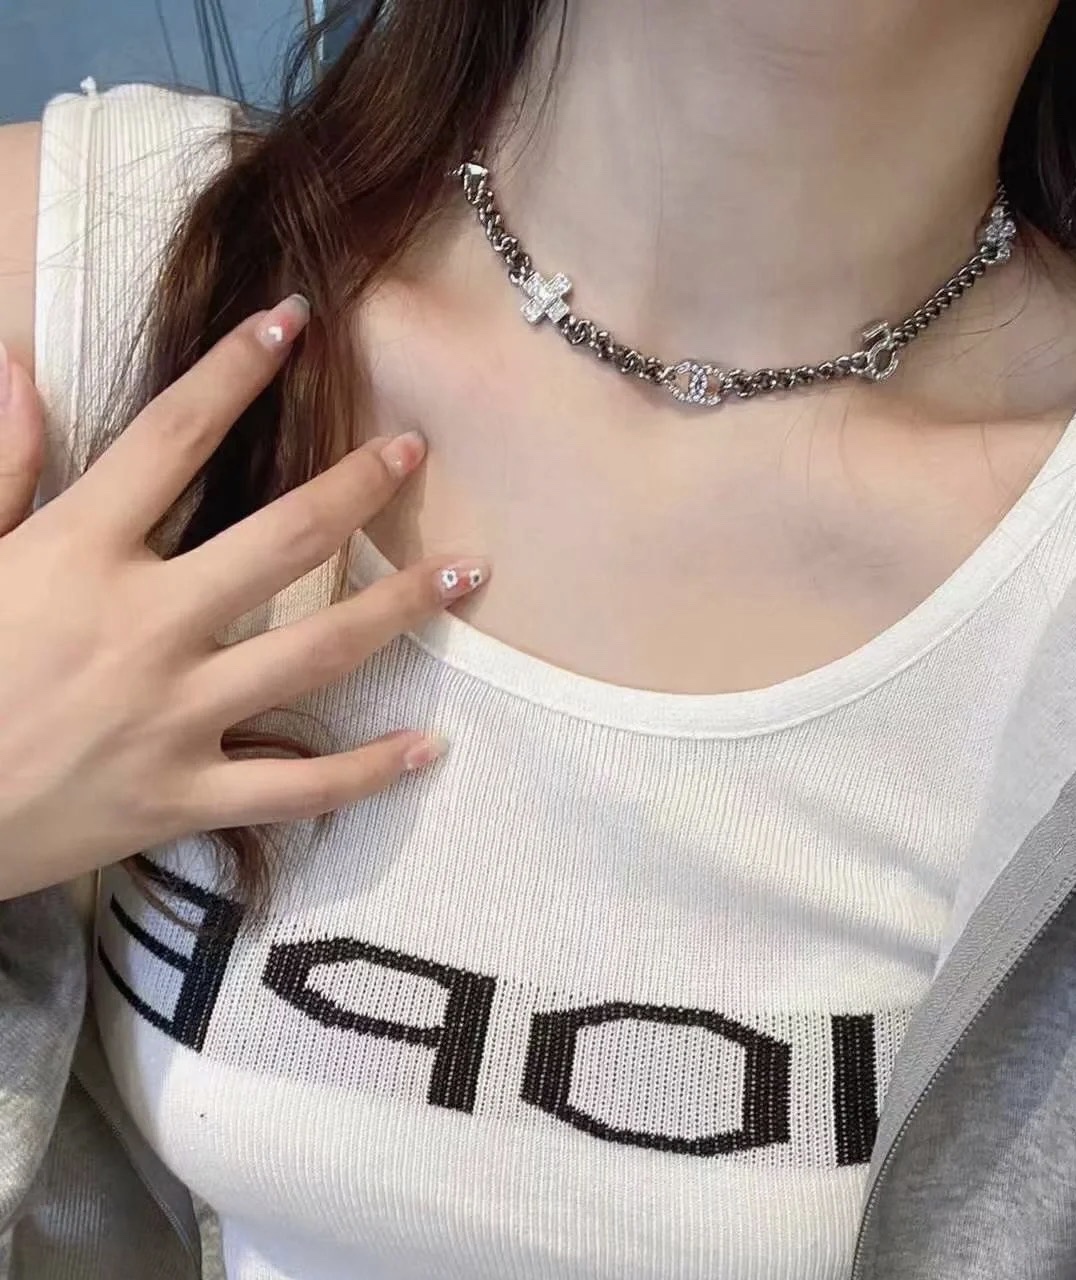 X527 Chanel choker necklace